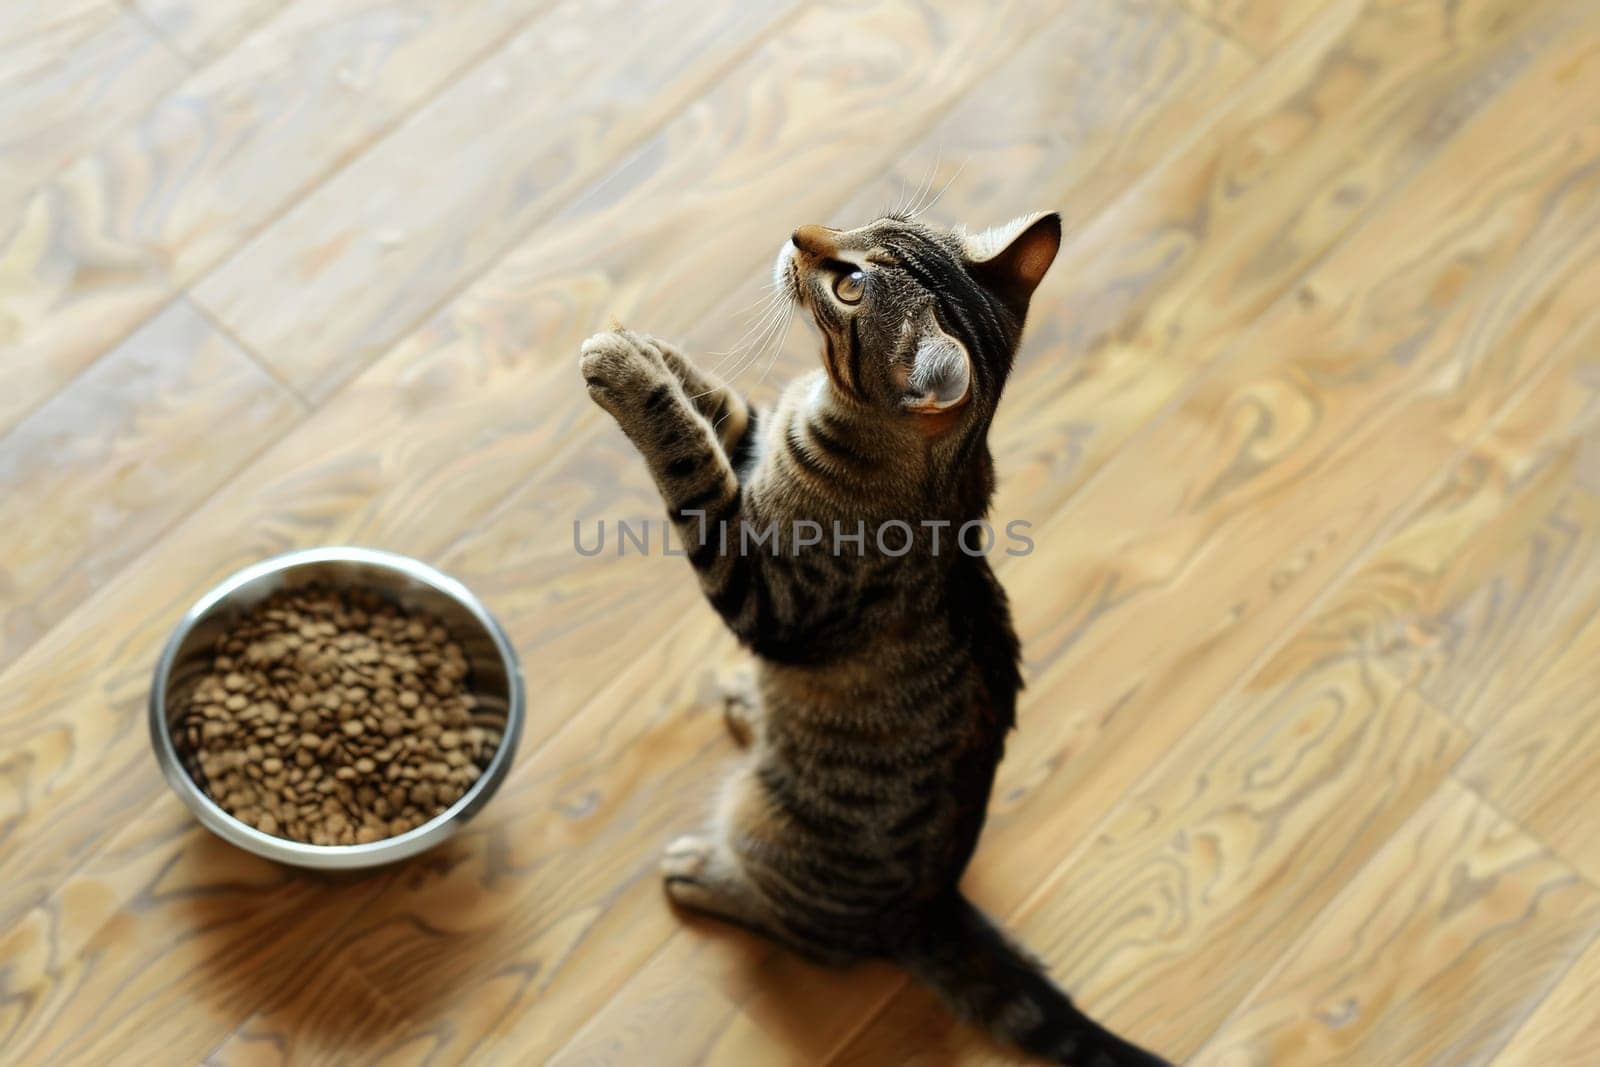 A cat sitting on floor looking up a bowl of cat food..